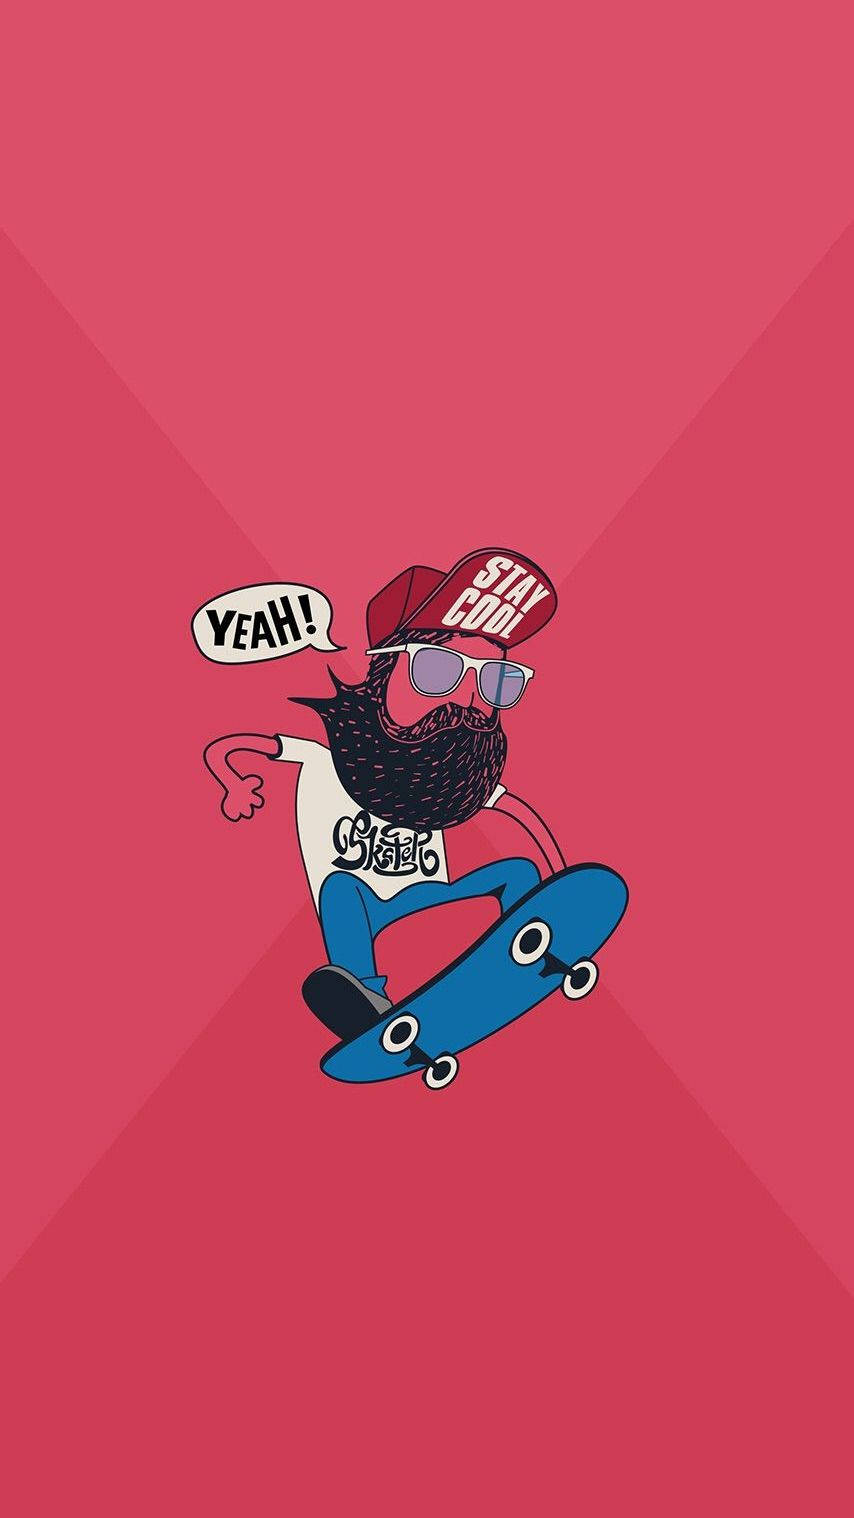 Catch Some Air on Your Skateboard Wallpaper